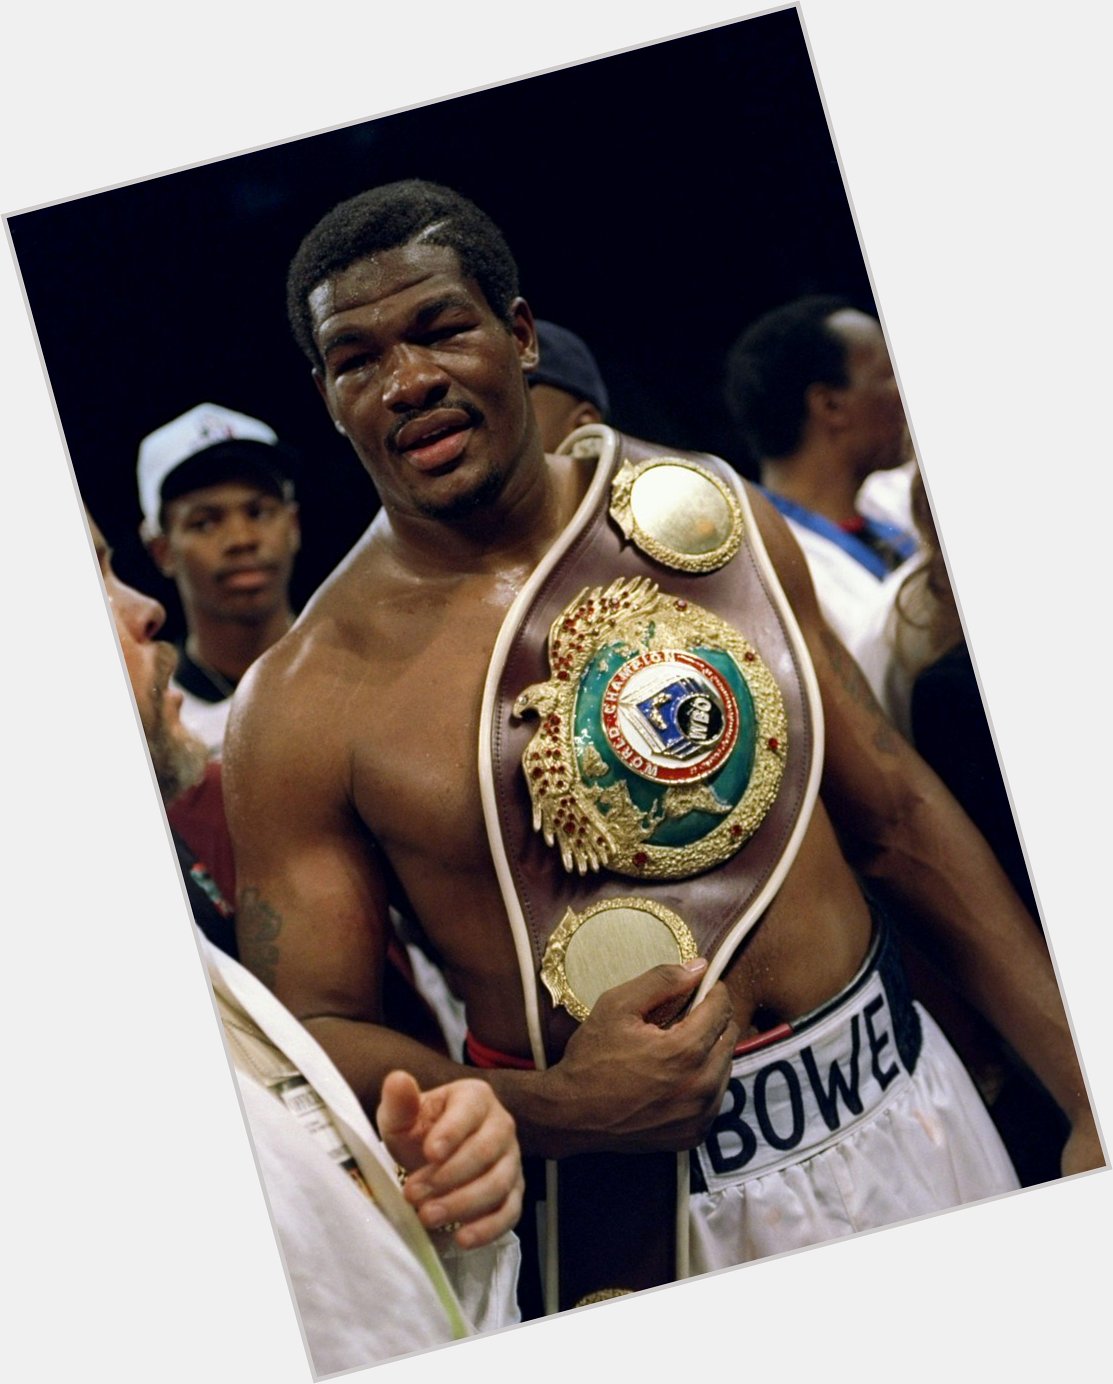 Happy Birthday to Riddick Bowe, who turns 48 today! 